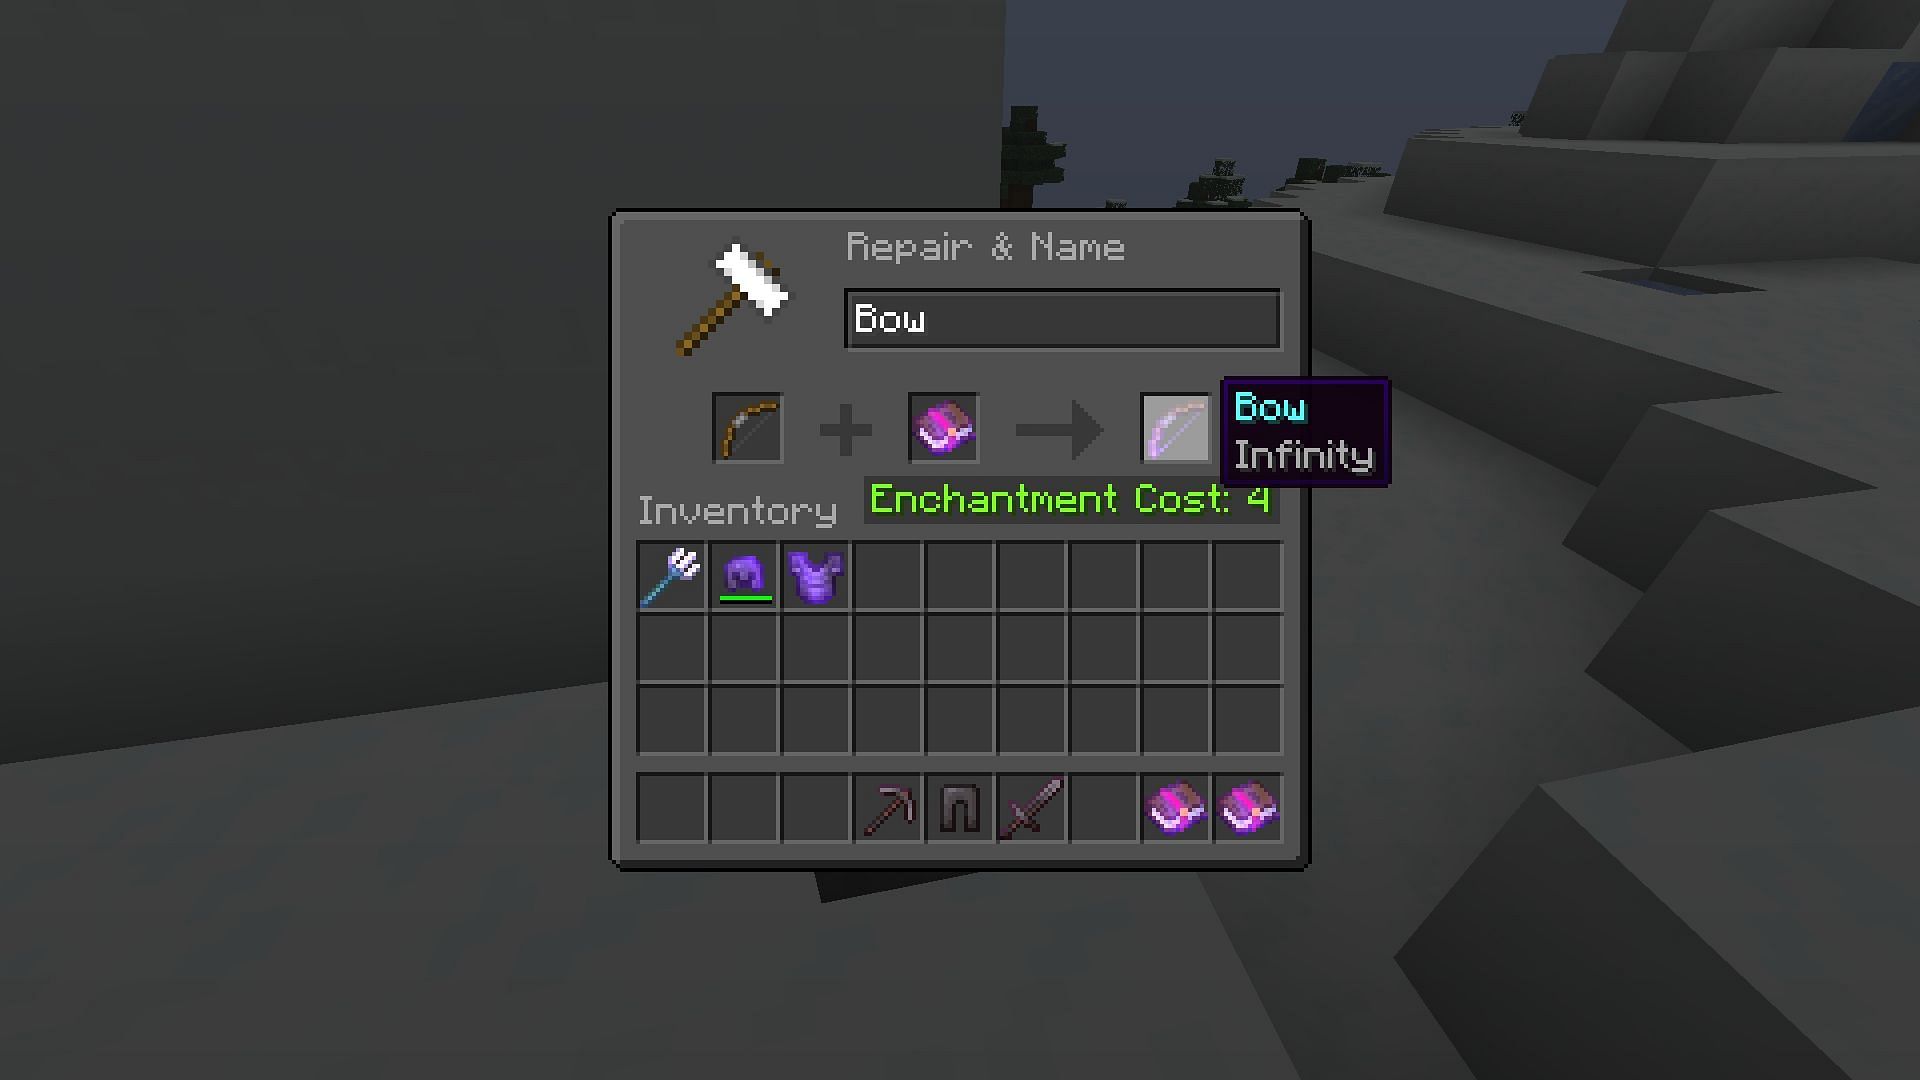 Infinity enchantment enables bows to shoot infinite arrows in Minecraft (Image via Mojang)